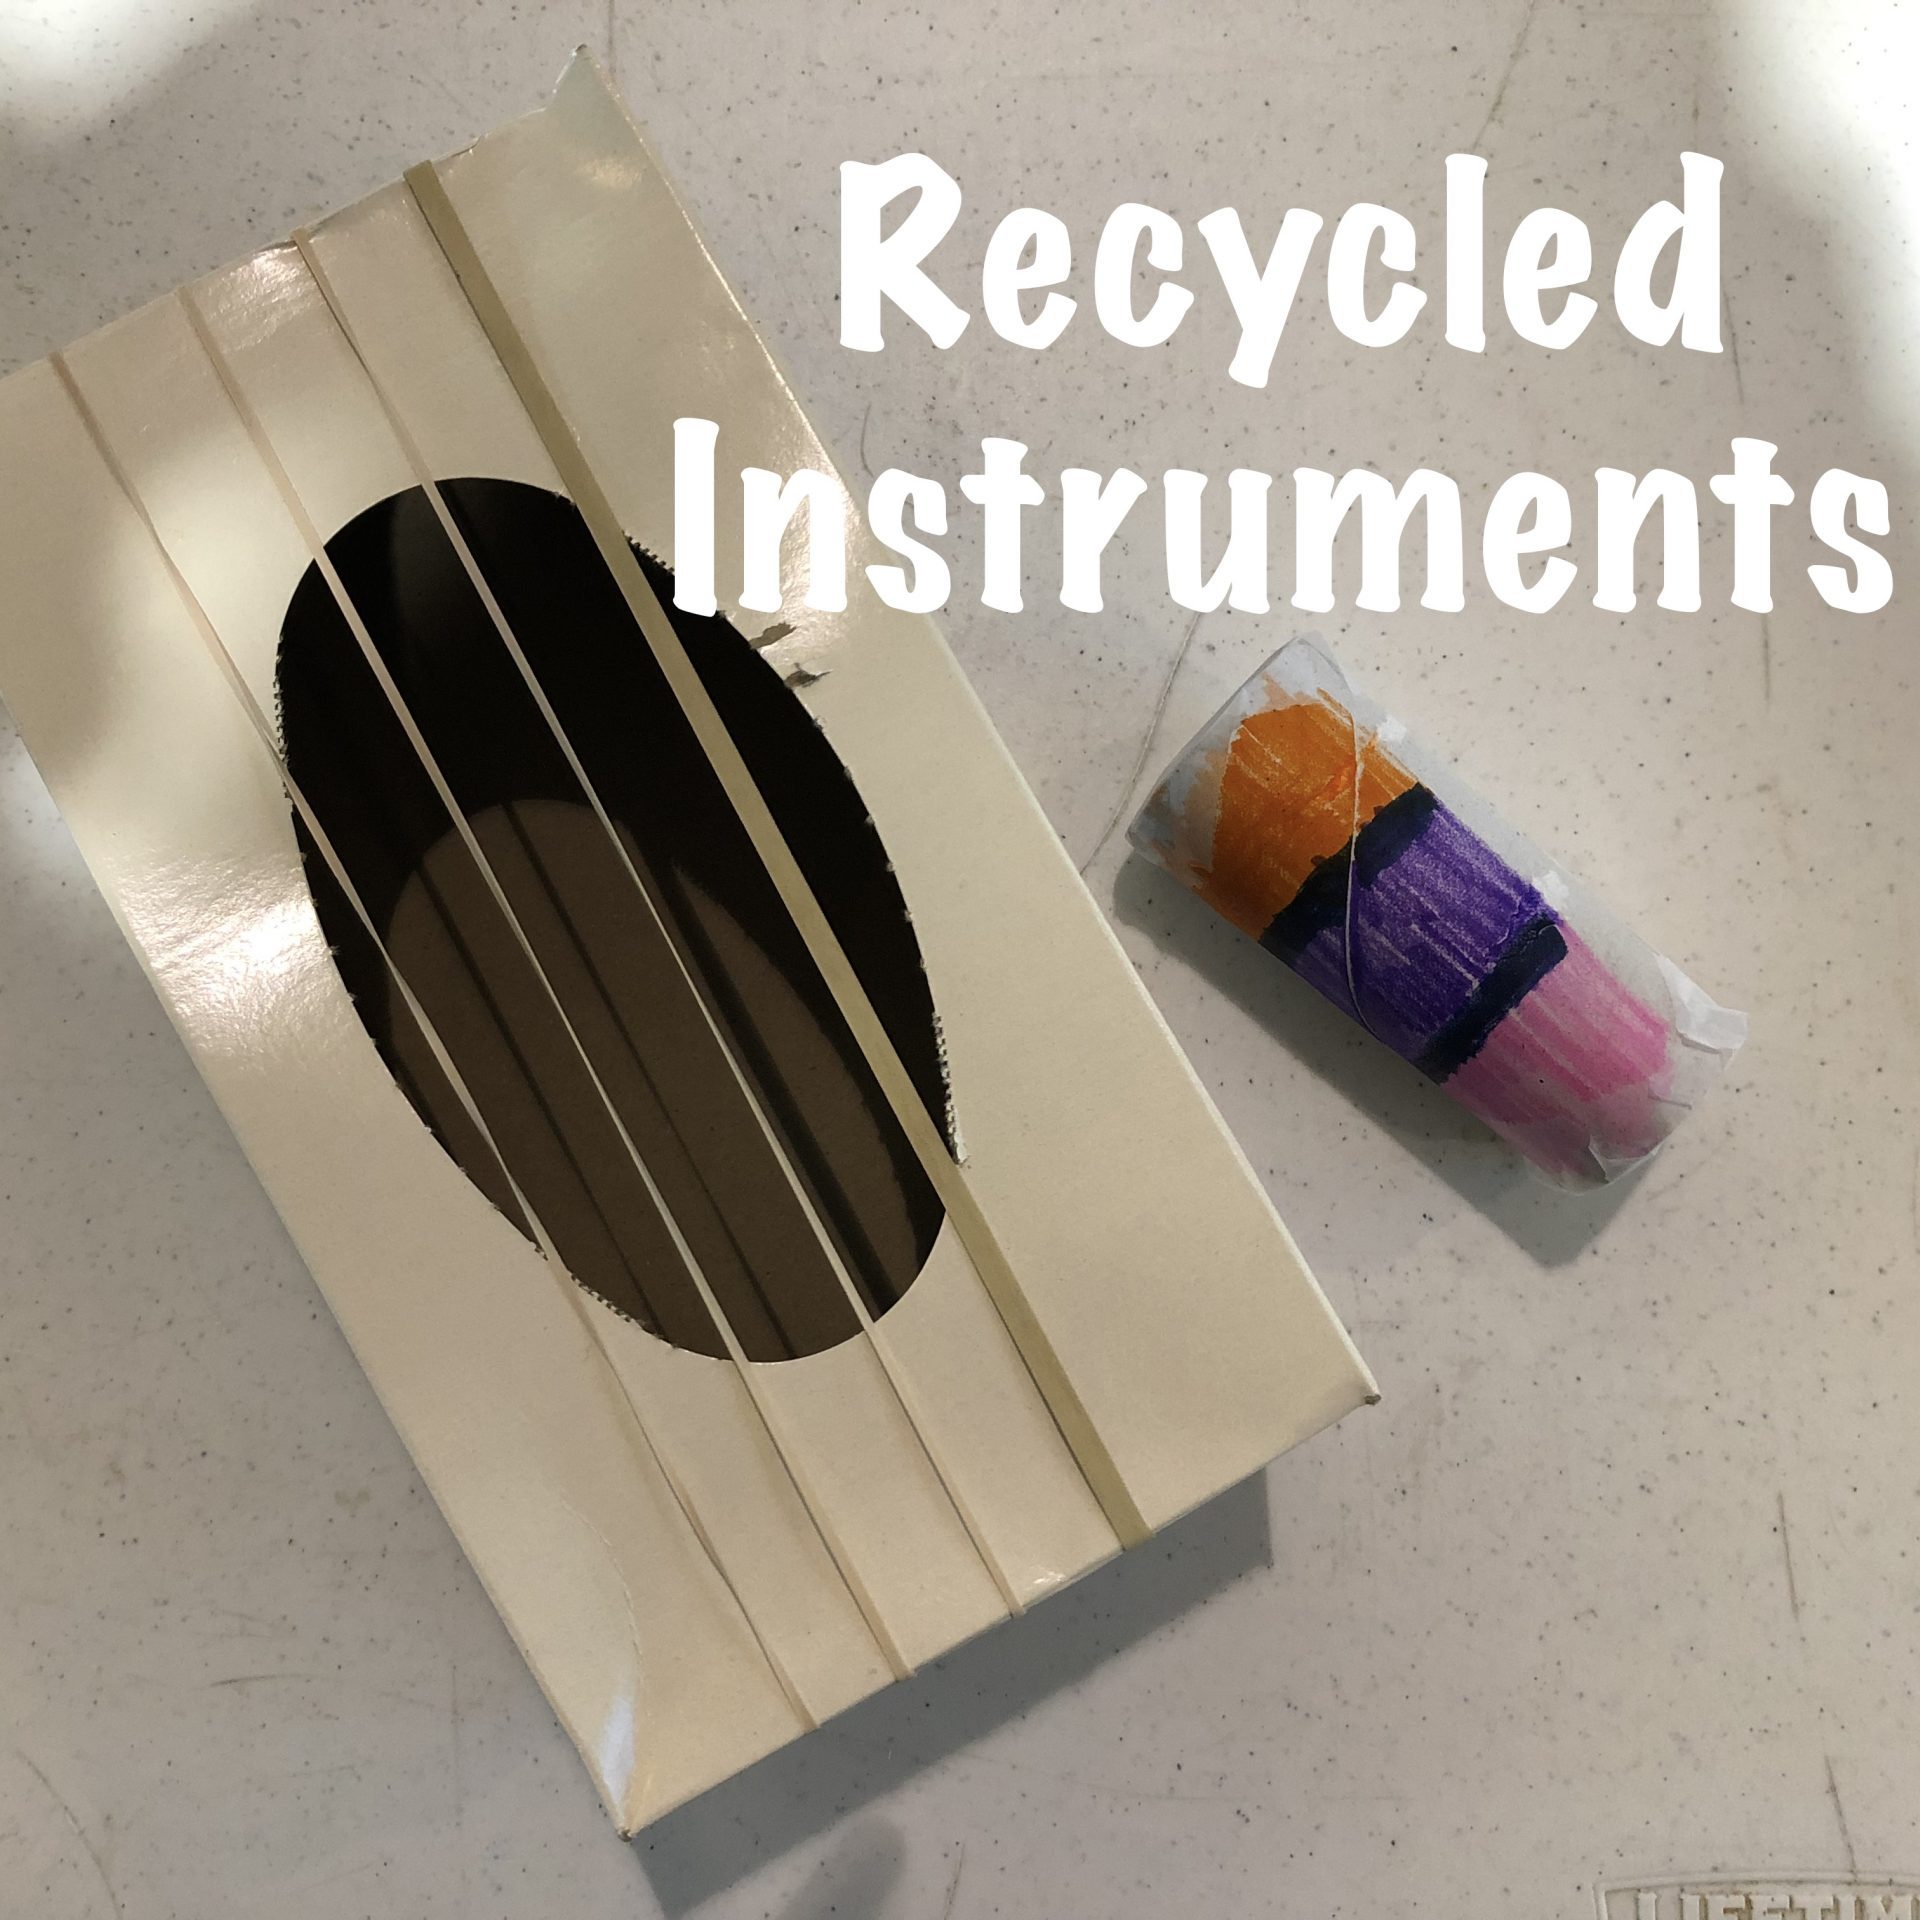 Recycled Instruments